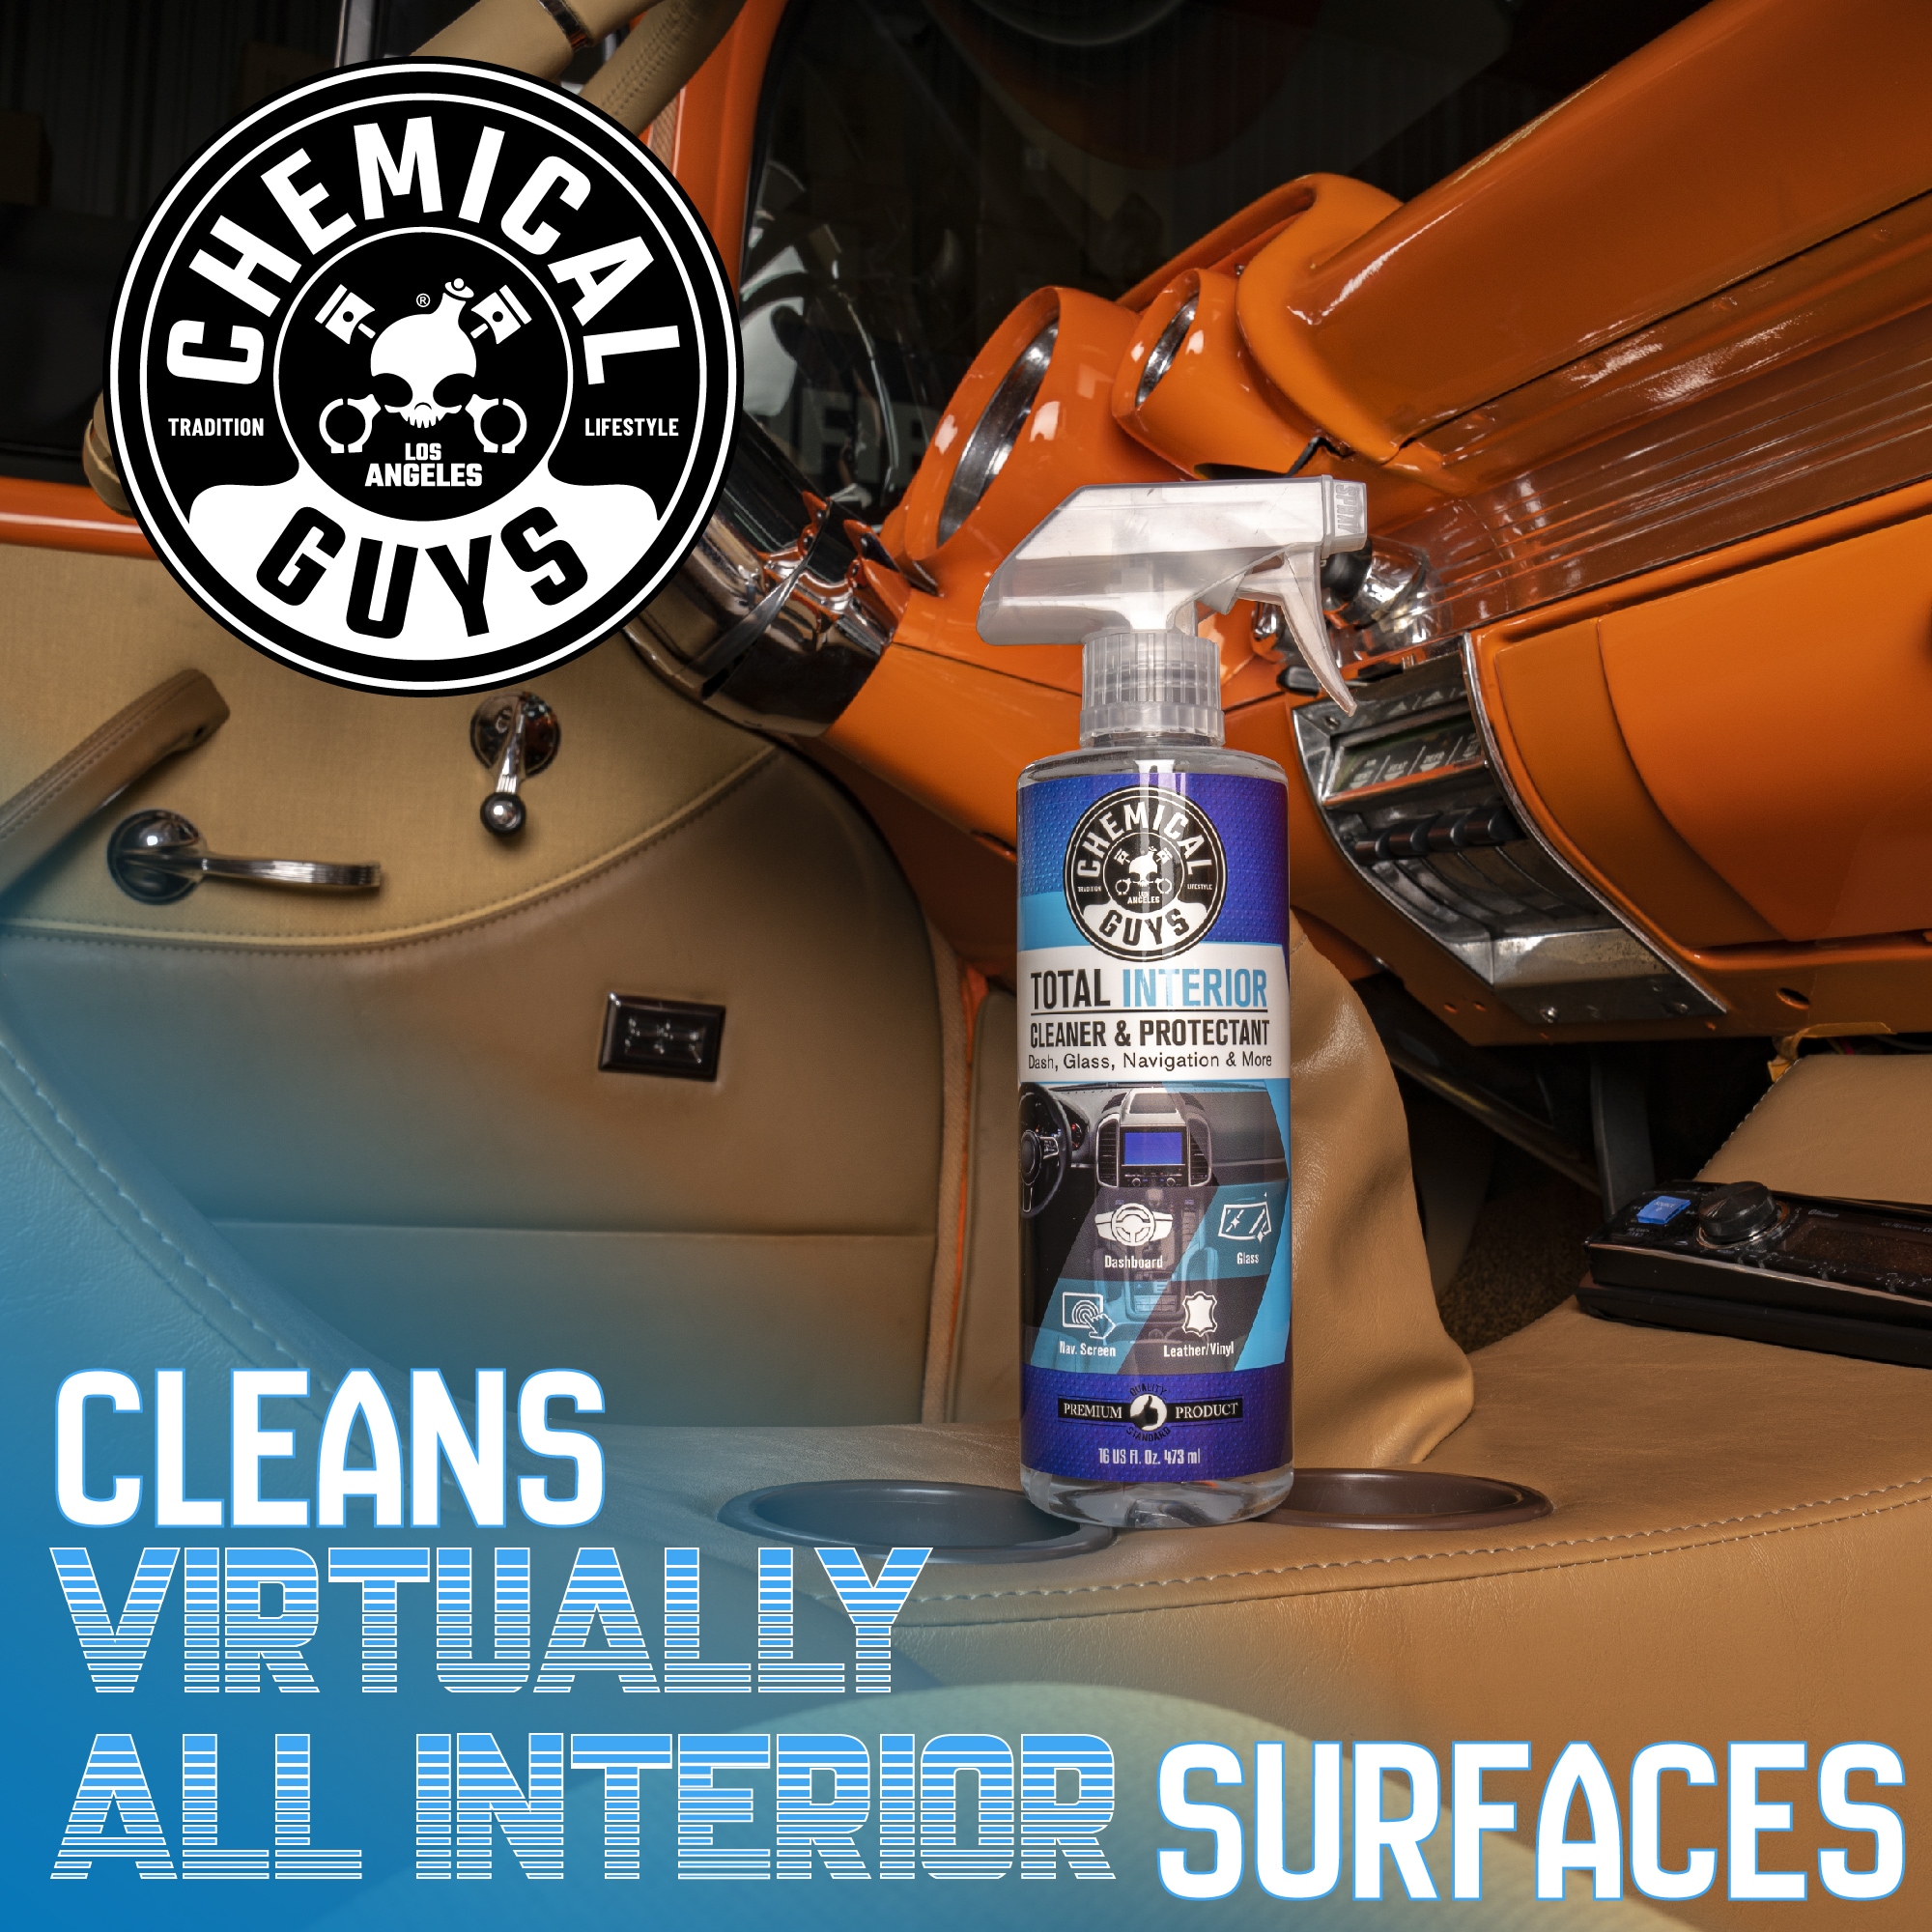 Chemical Guys: (16 Oz)Foaming Fabric Cleaner — Grade A Detailing